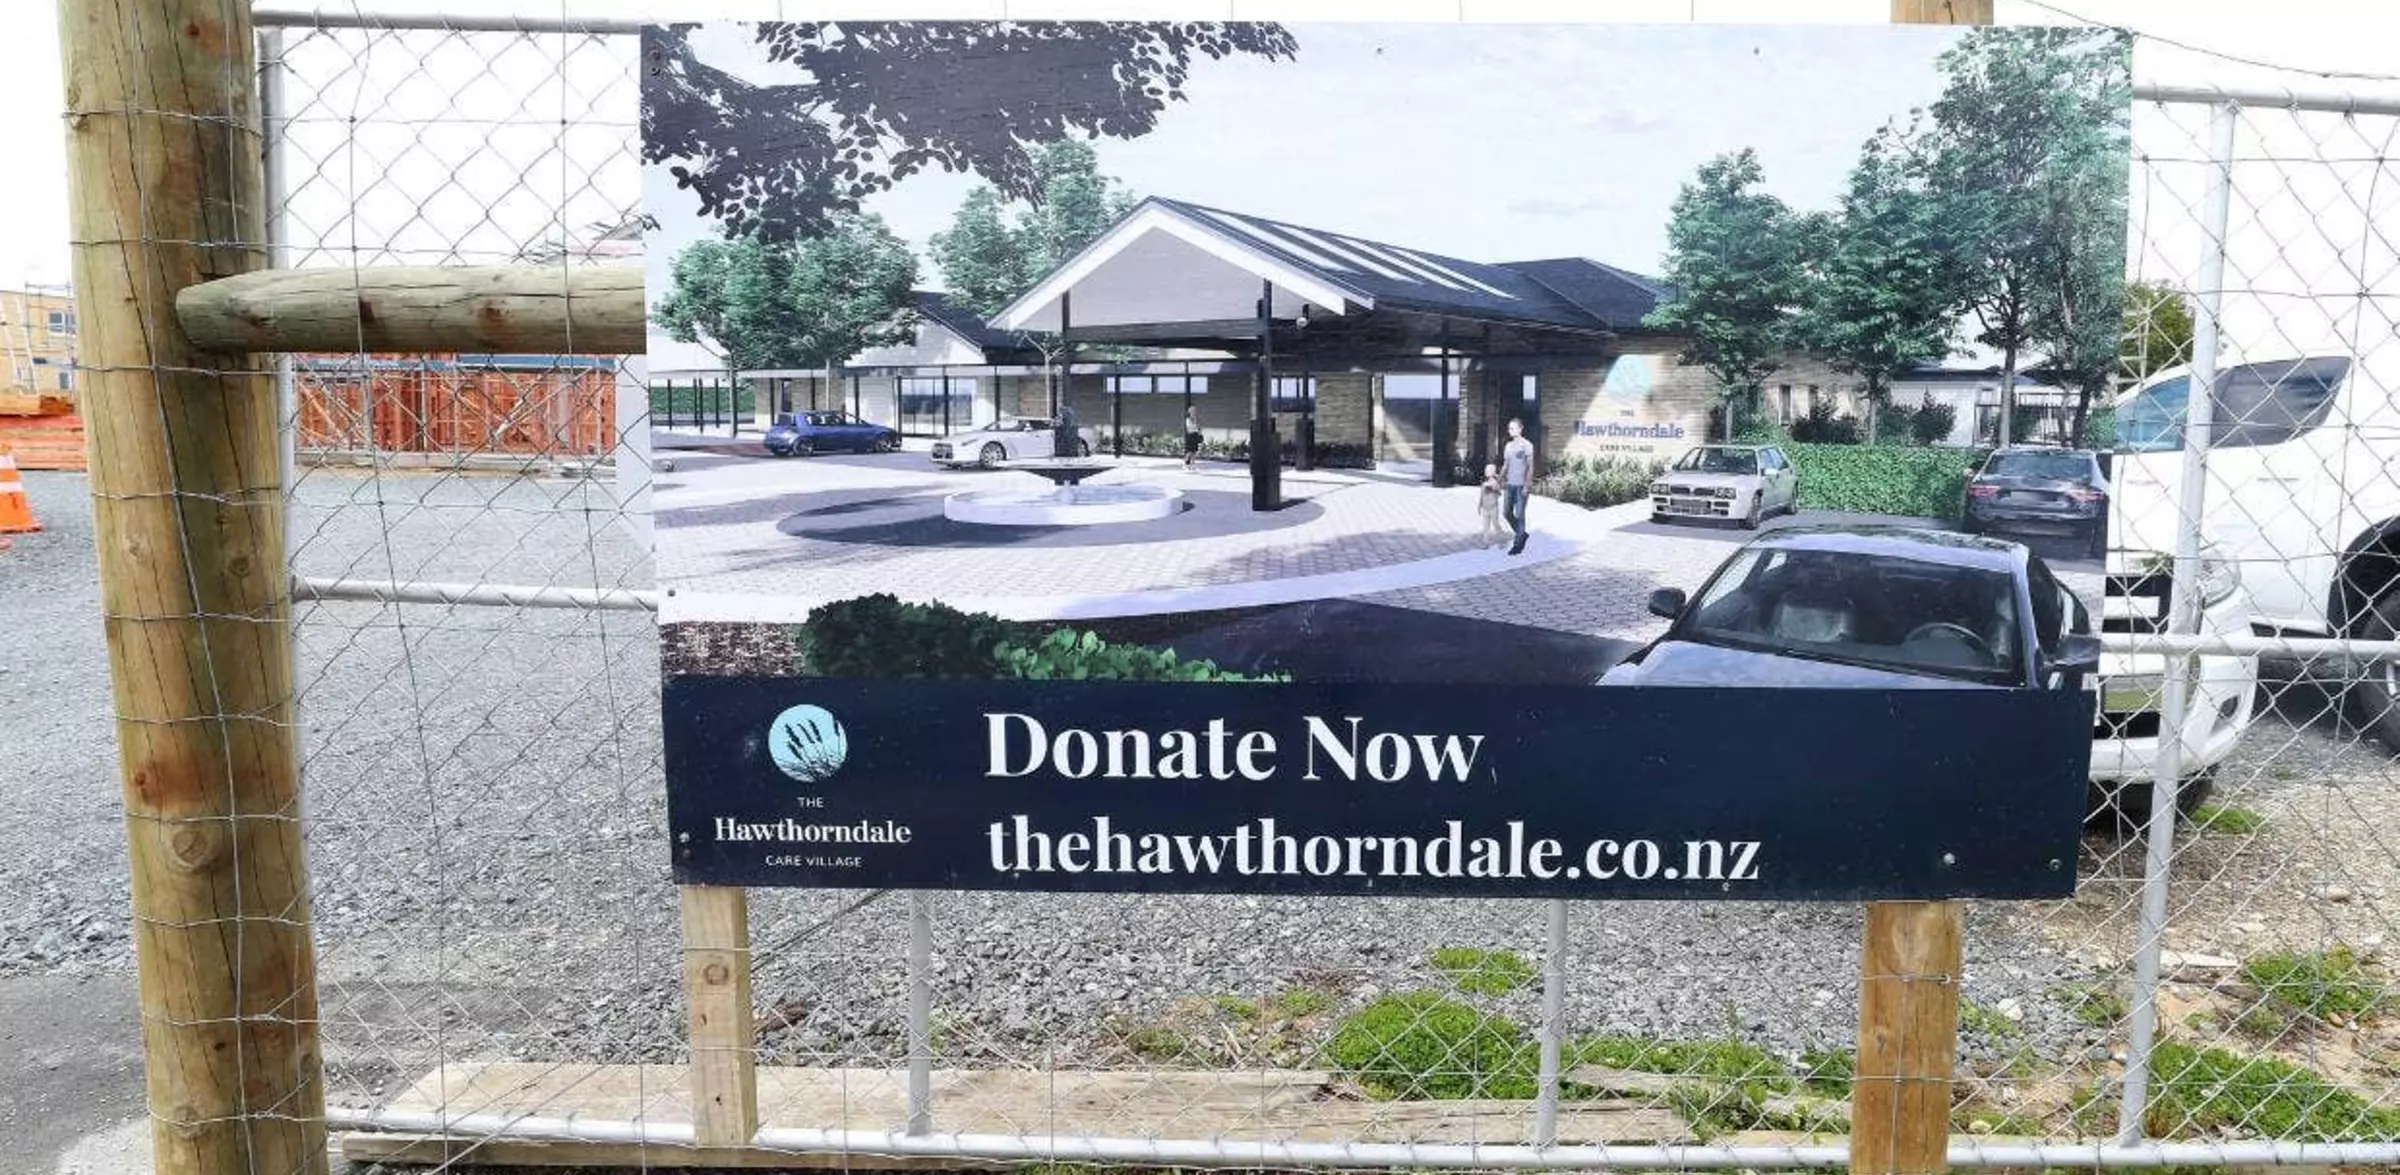 A peek at what the Hawthorndale Care Village will look like from the Tay St entrance in Invercargill